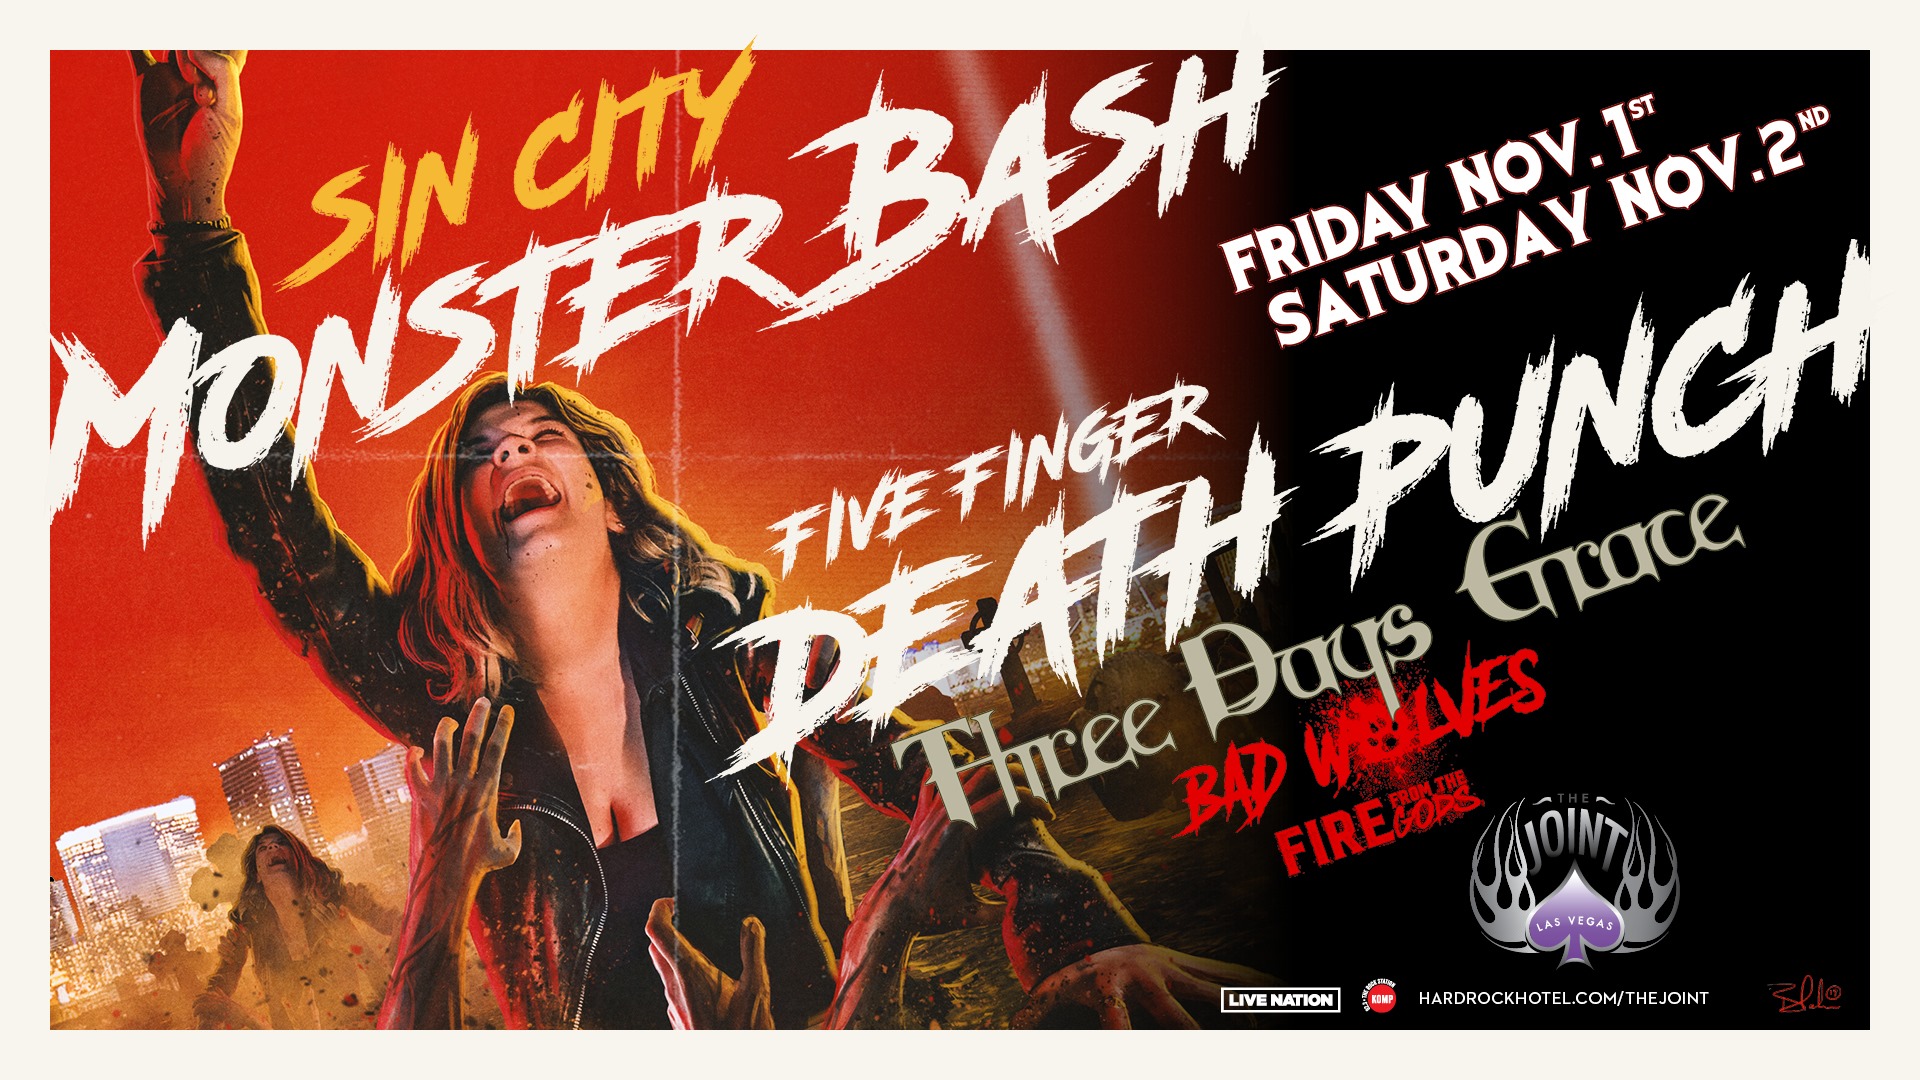 Five Finger Death Punch to invade The Joint for TWO days!